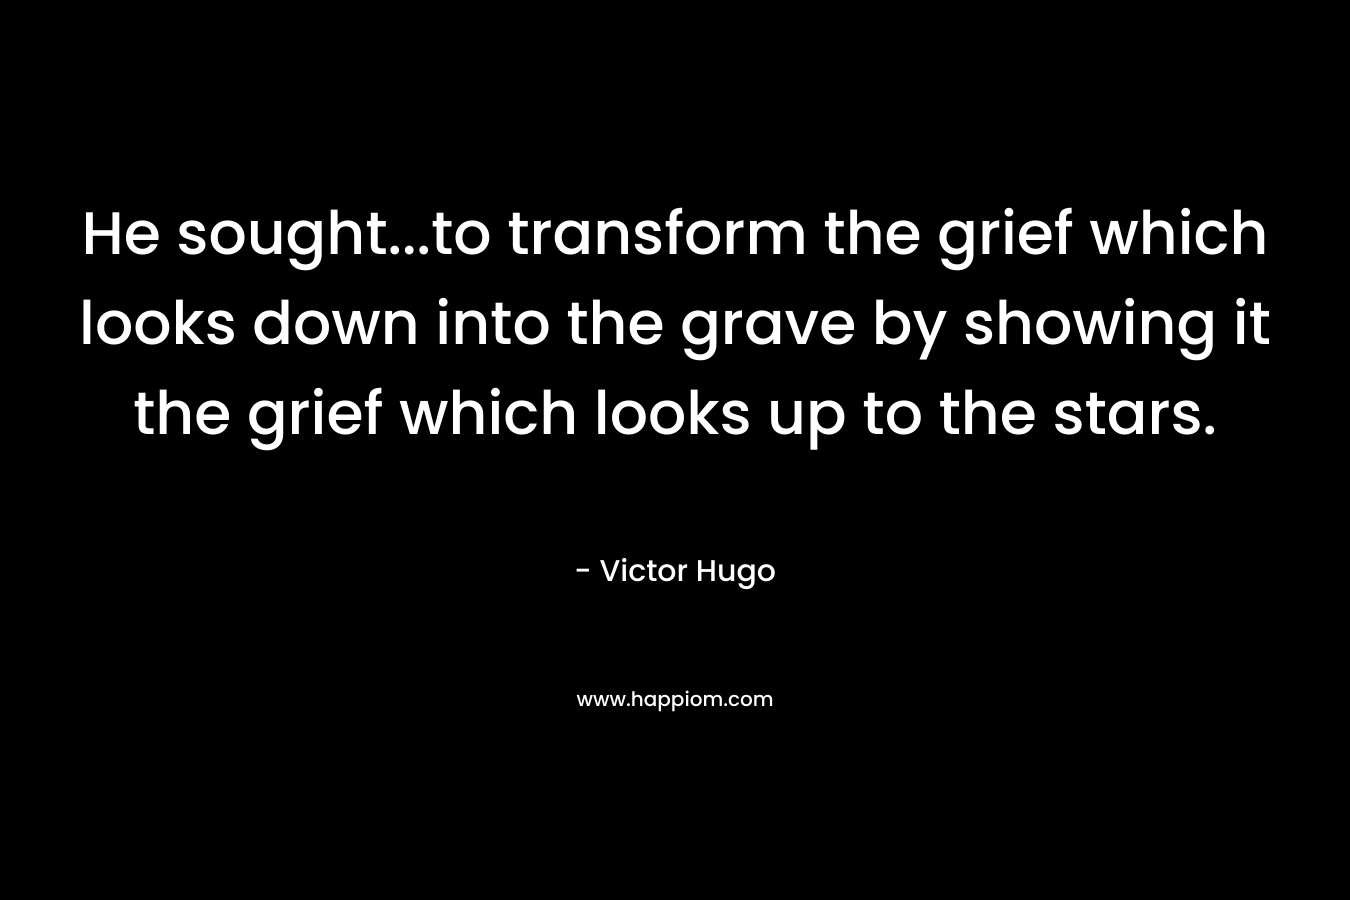 He sought...to transform the grief which looks down into the grave by showing it the grief which looks up to the stars.